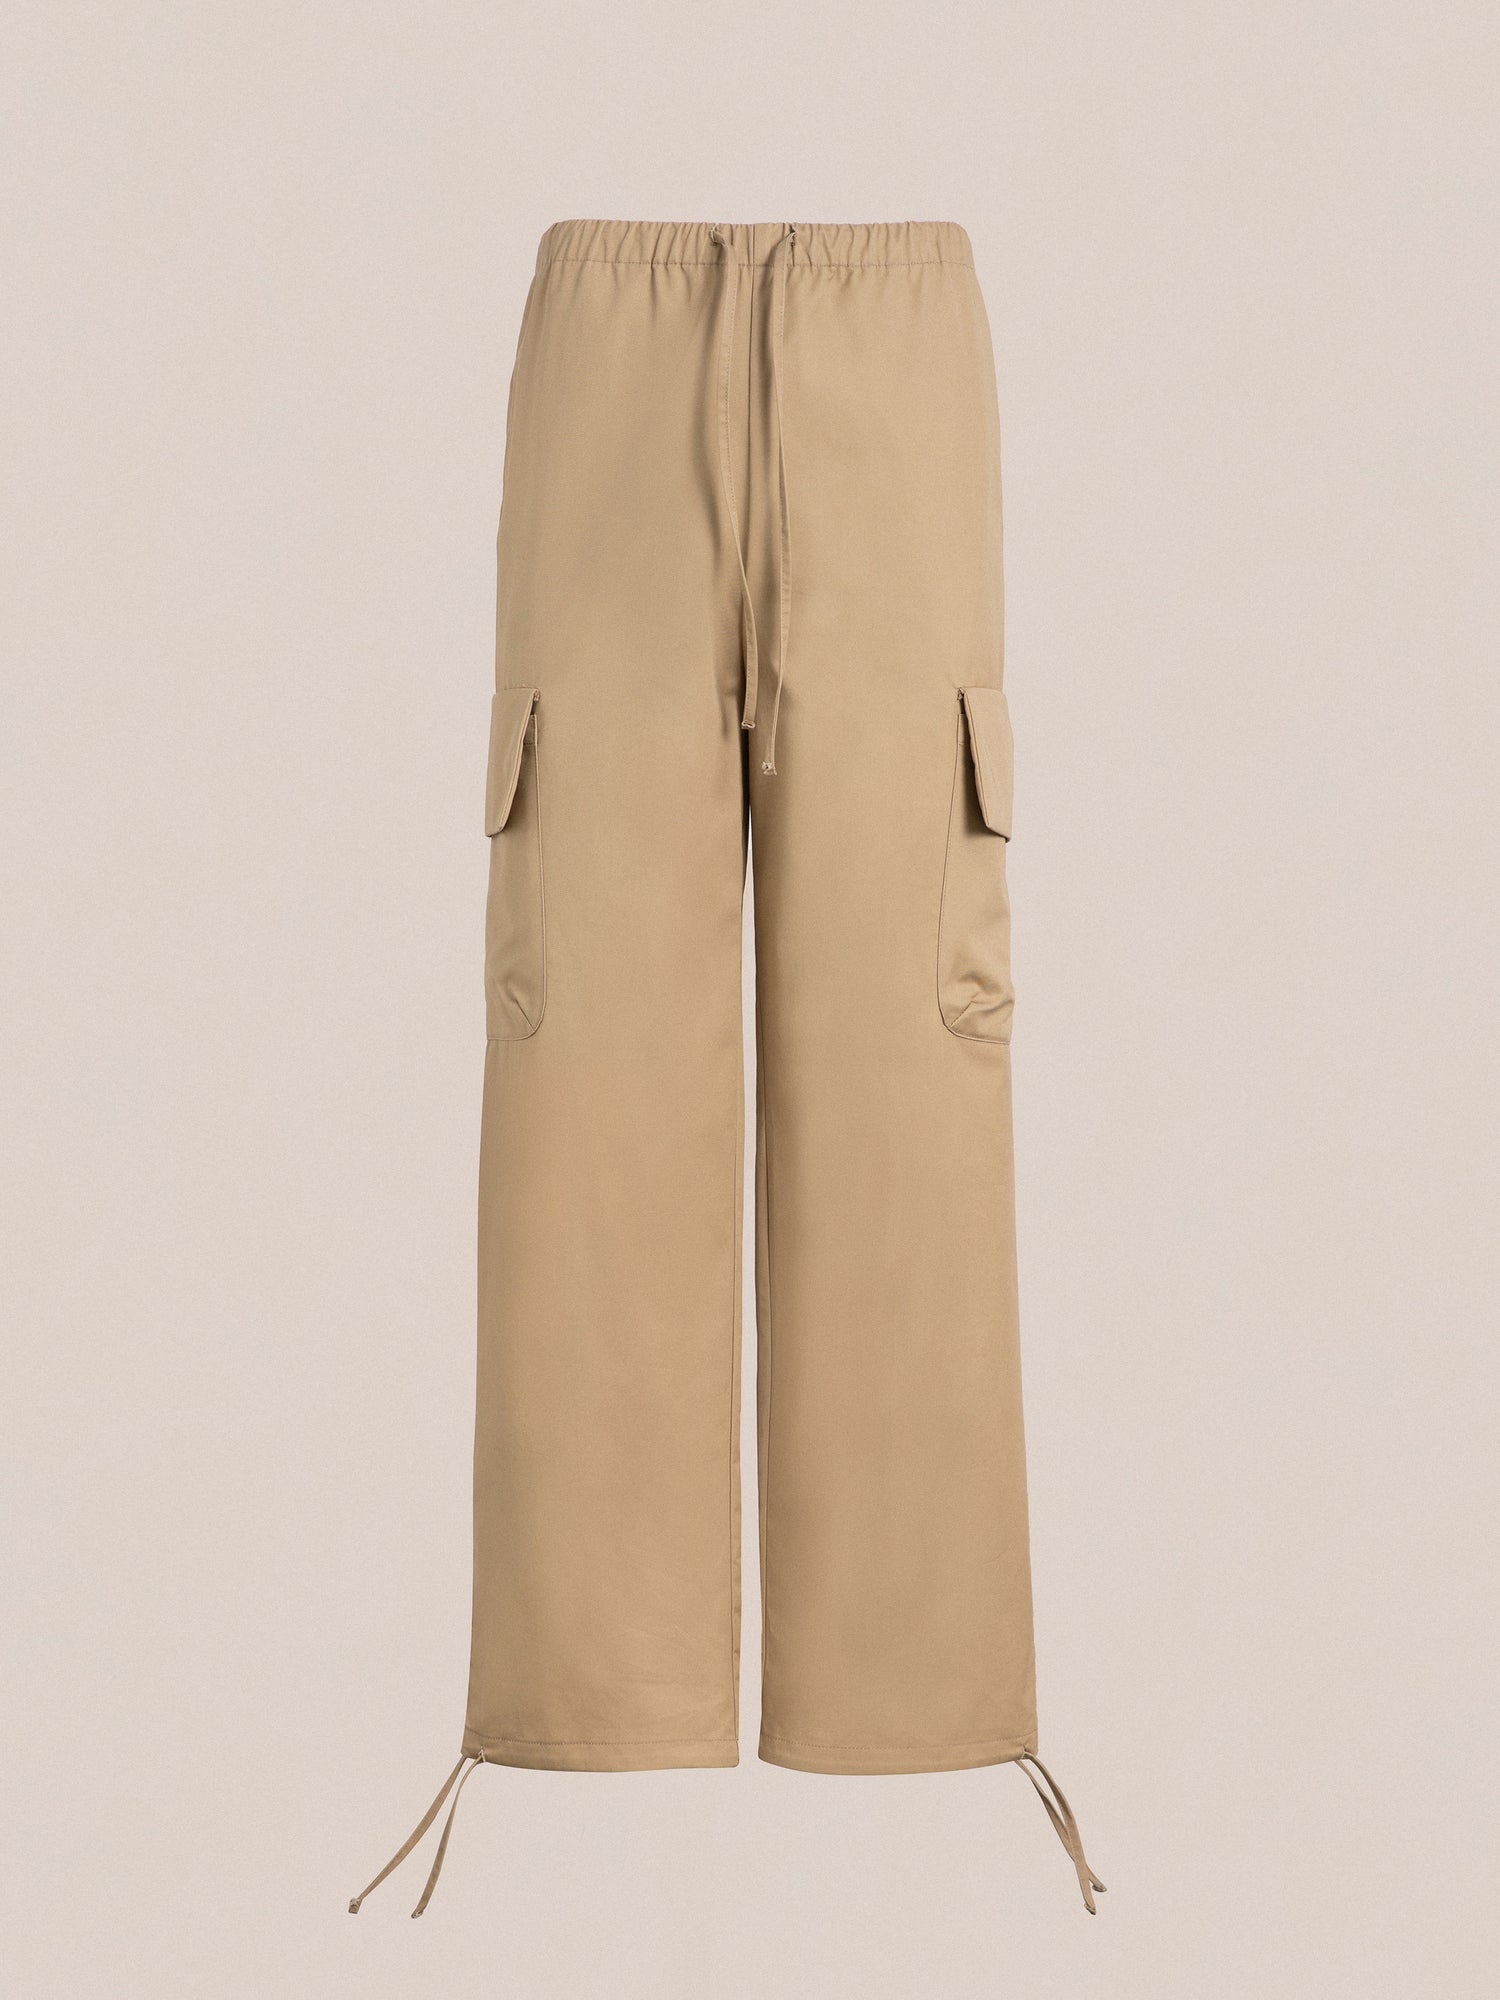 A women's Twill cargo drawstring pants in tan by Found.